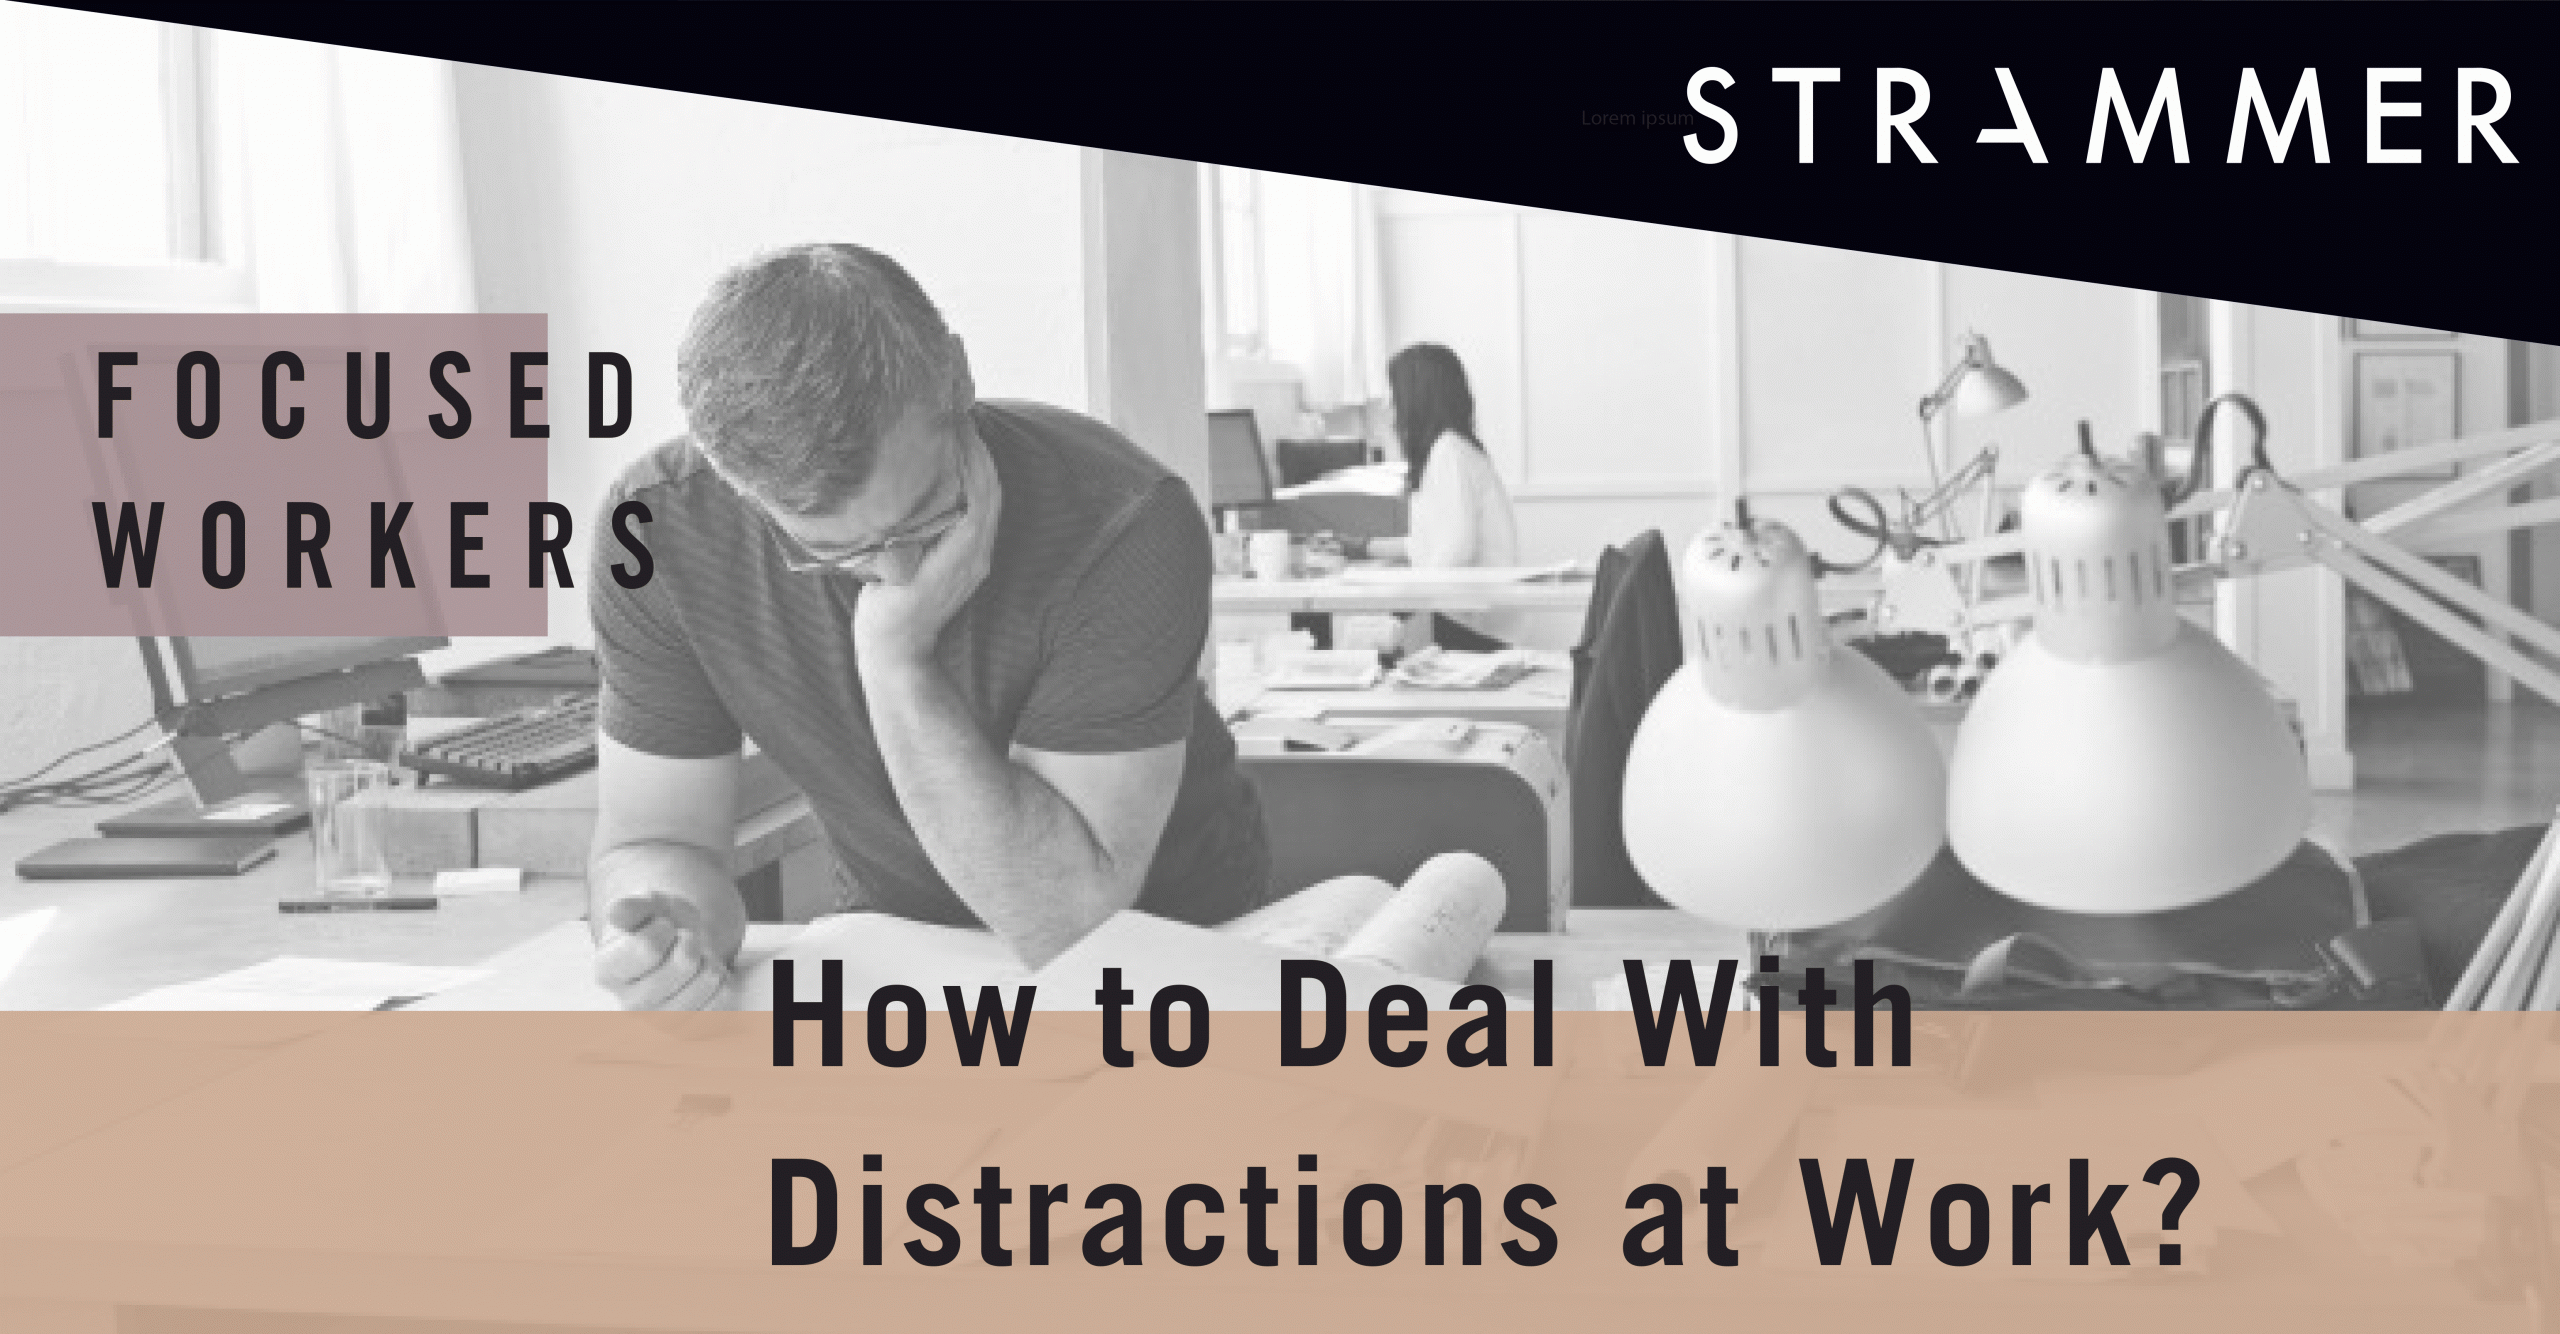 Distractions at Work: How to Deal With Them?